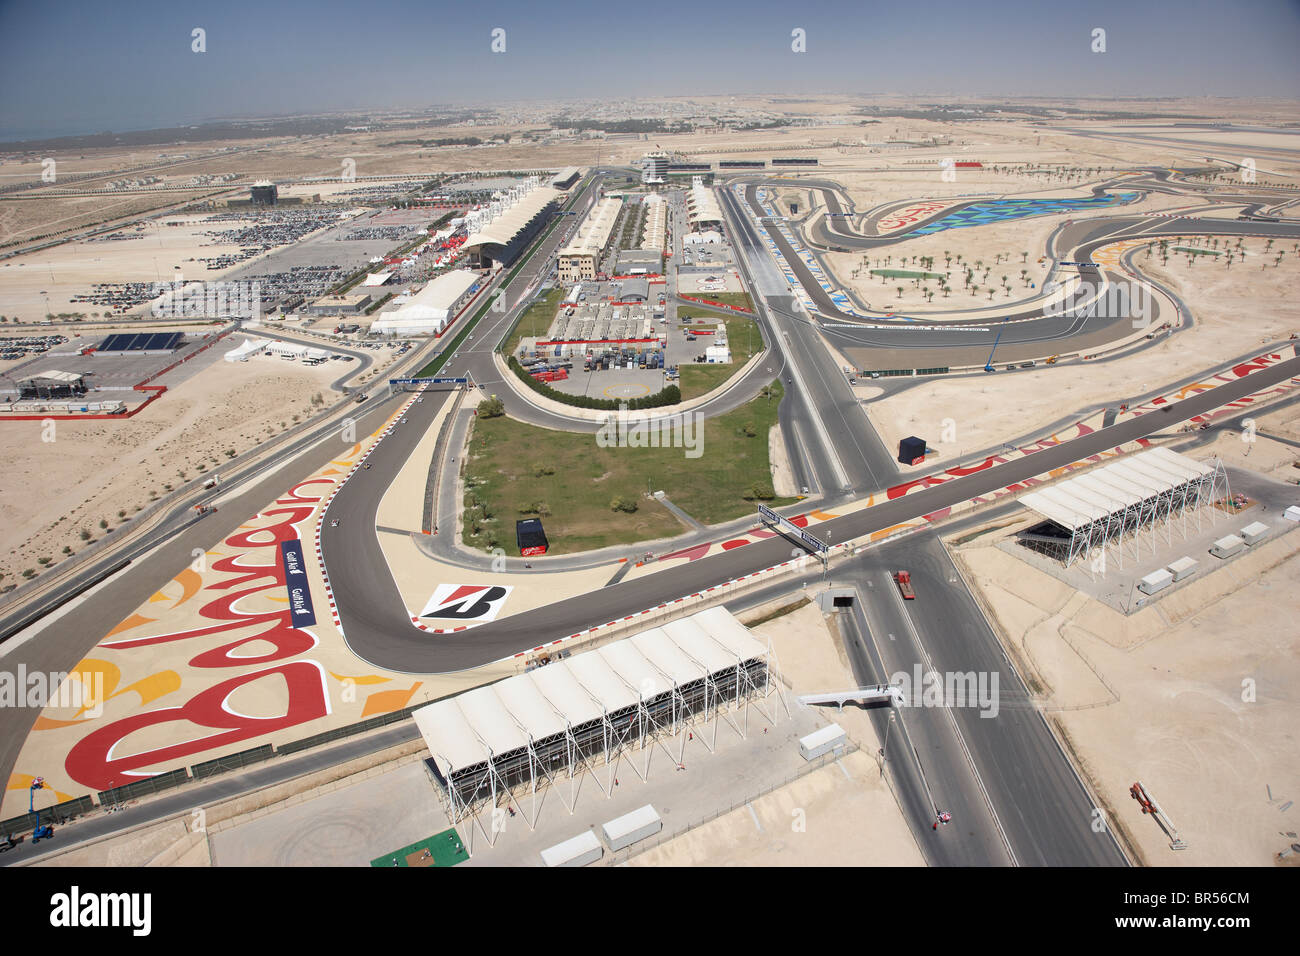 Aerial photo of the Bahrain International Circuit during the 2010 Formula 1 Grand Prix Stock Photo